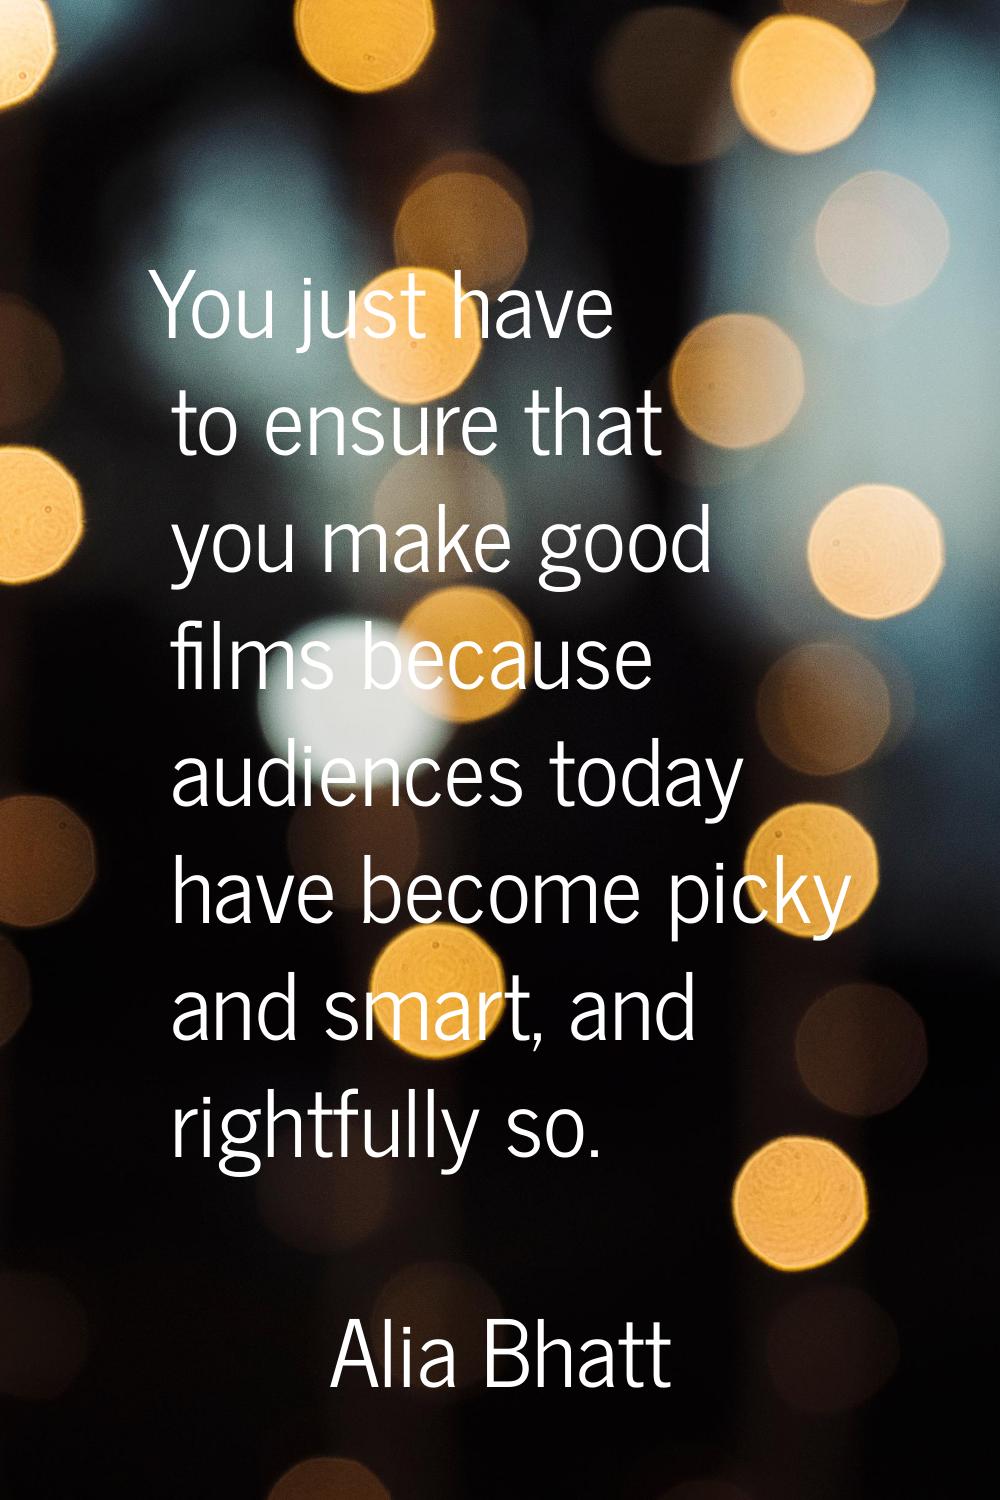 You just have to ensure that you make good films because audiences today have become picky and smar